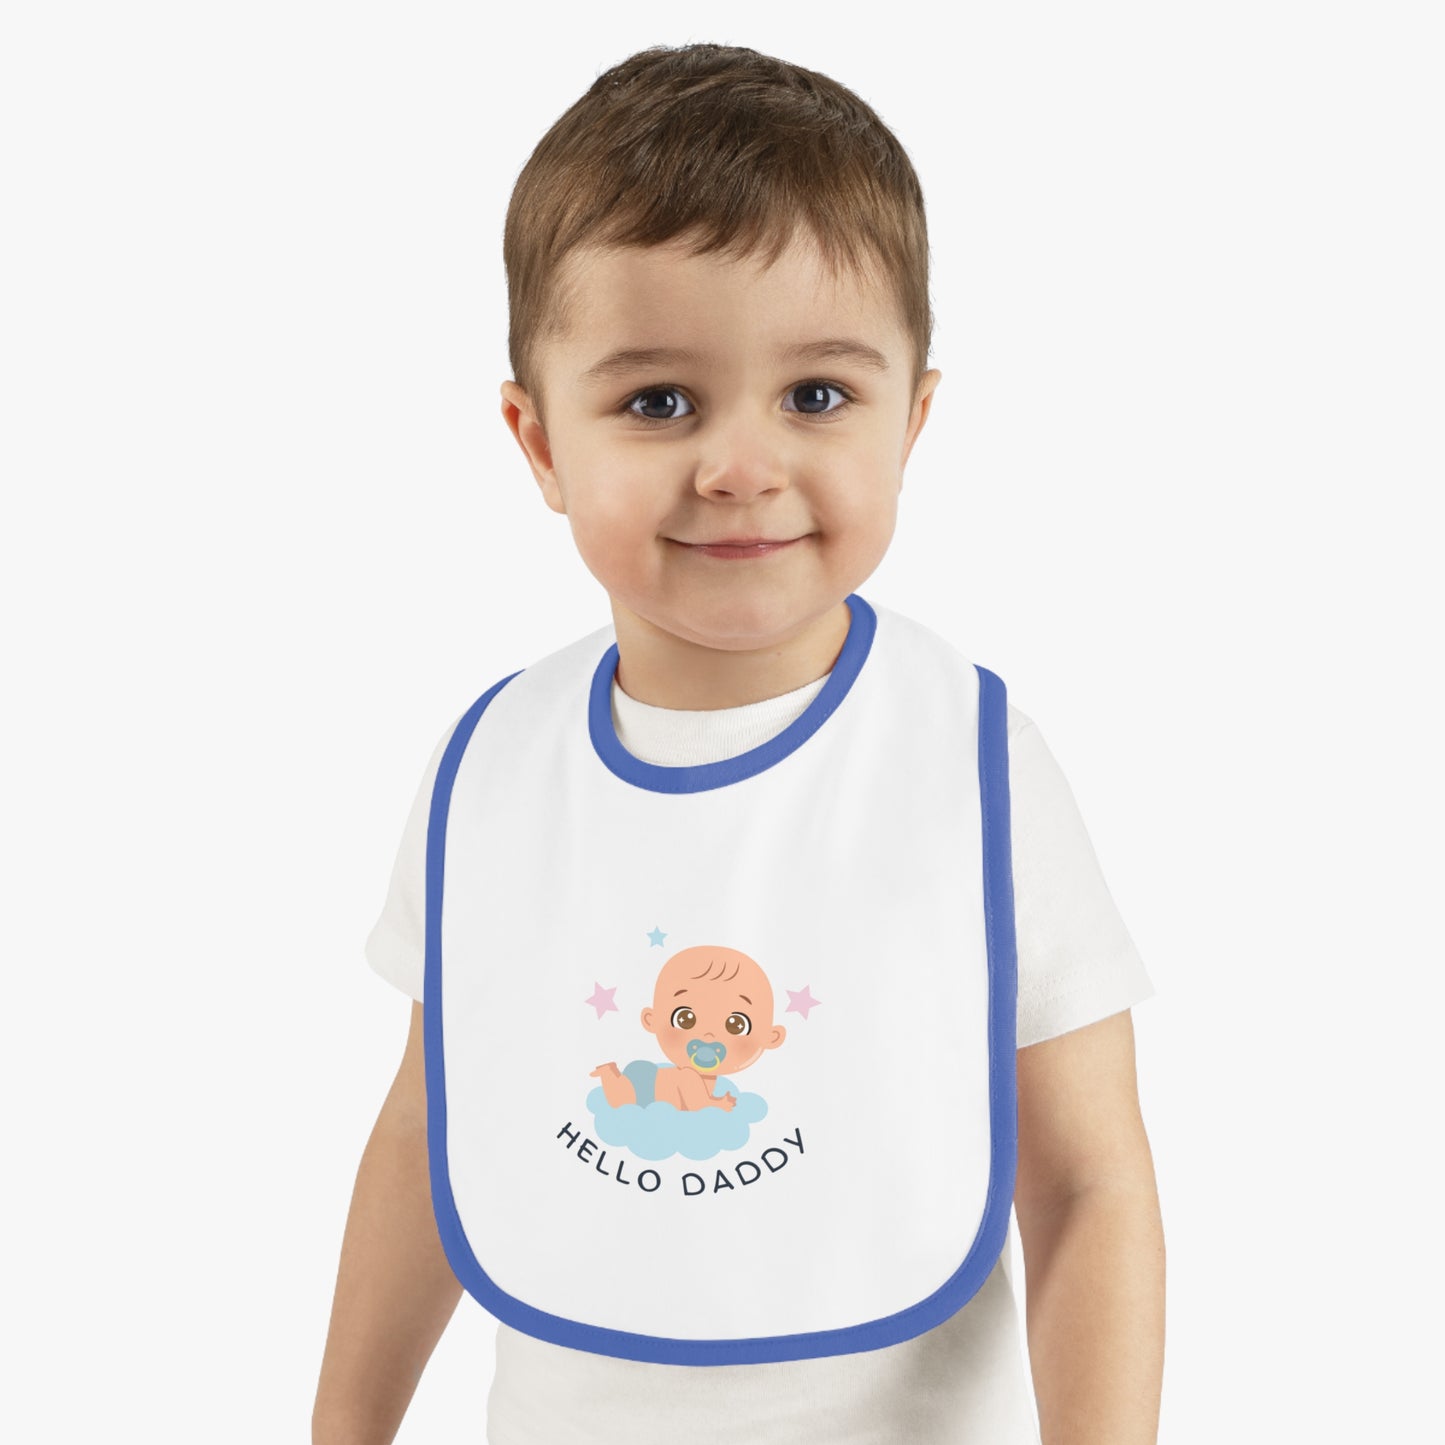 Adorable Baby & Kid Apparel Featuring the Playful 'Hello Daddy' Contrast Trim Jersey Bib – Perfect for Cherished Moments and Smiles Galore!"